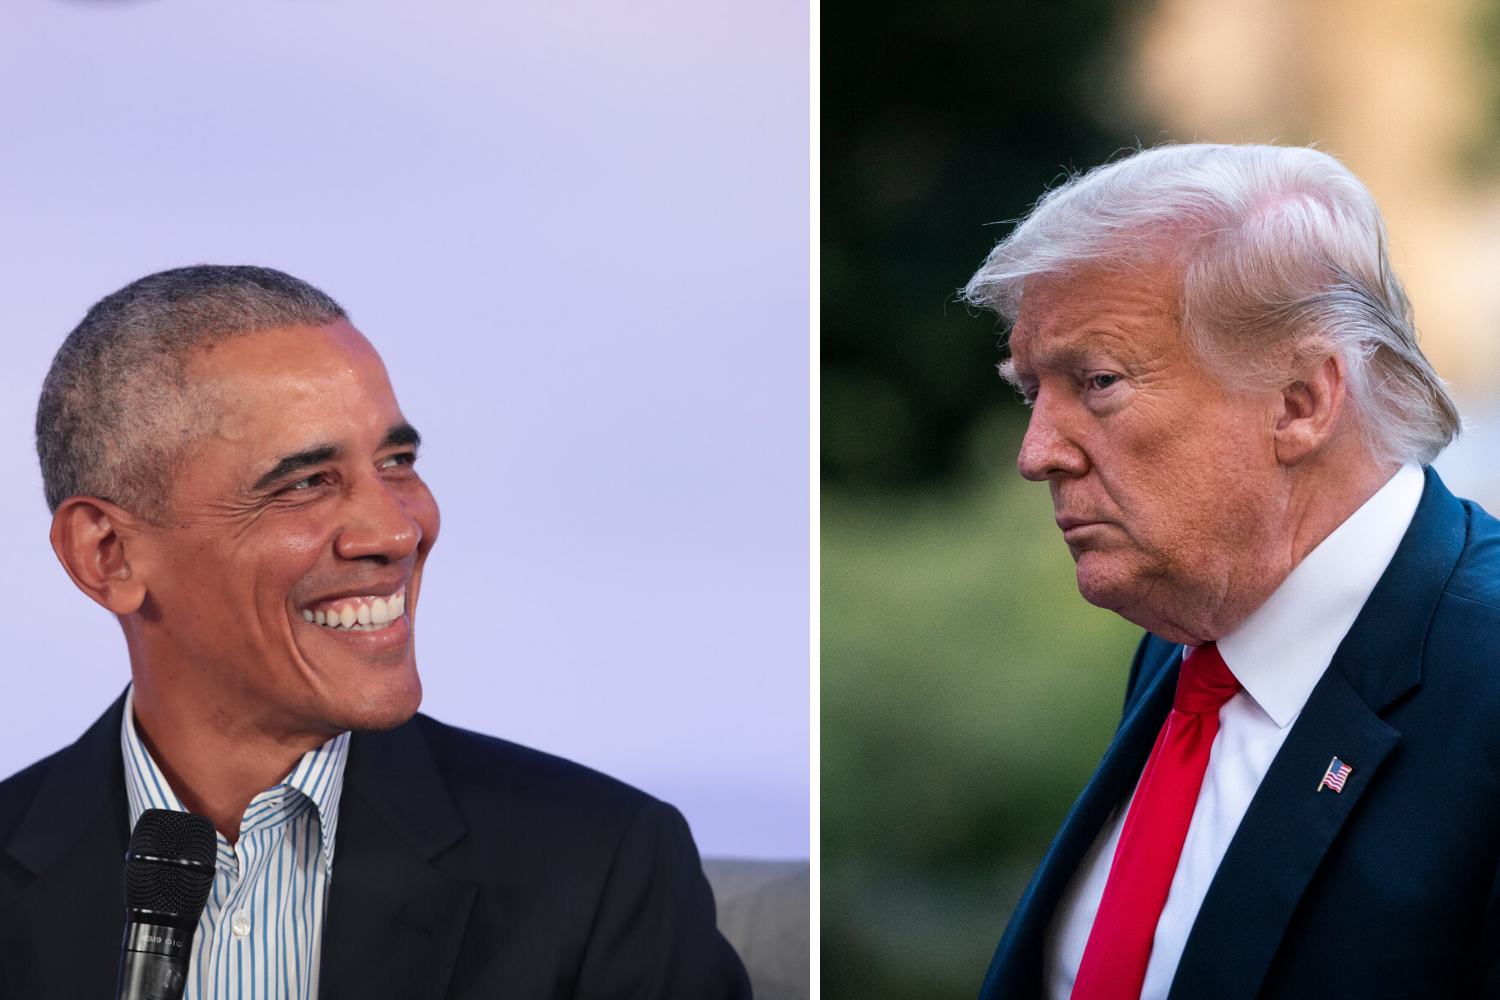 Barack Obama’s witty self-deprecation is not a characteristic shared by Donald Trump